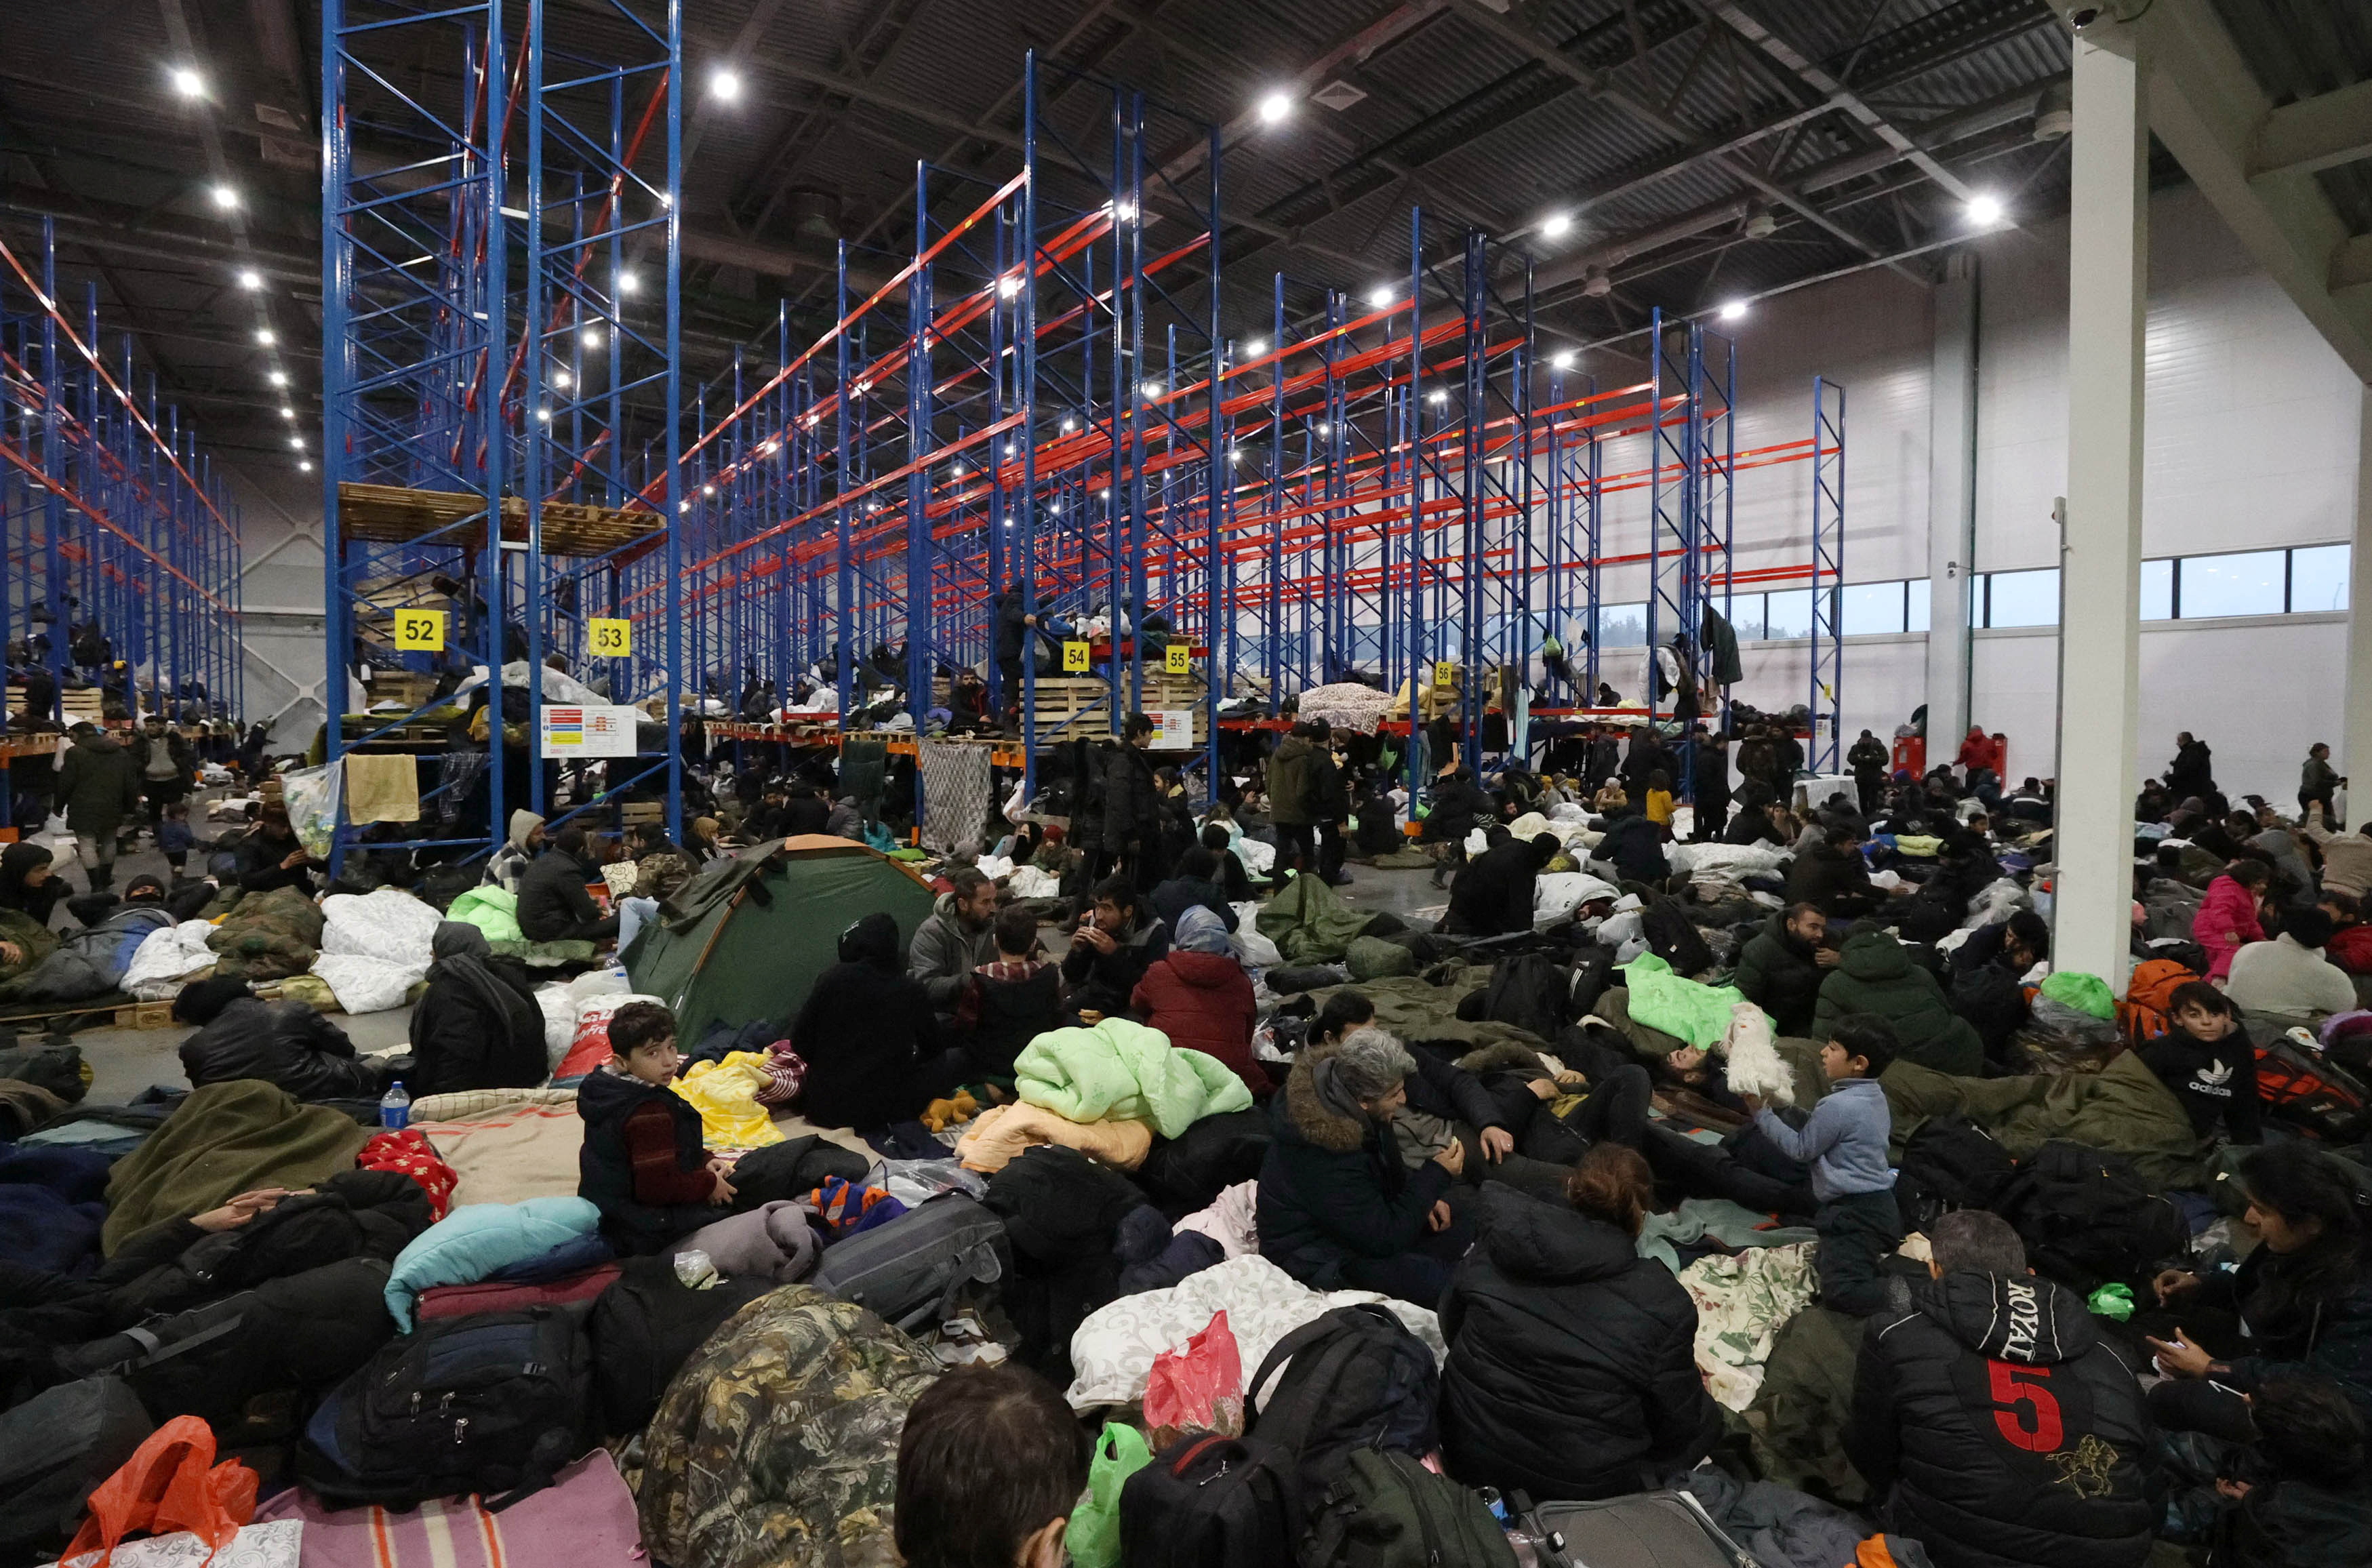 Migrants stay in the transport and logistics centre Bruzgi on the Belarusian-Polish border in the Grodno region, Belarus November 19, 2021.  Maxim Guchek/BelTA/Handout via REUTERS ATTENTION EDITORS - THIS IMAGE HAS BEEN SUPPLIED BY A THIRD PARTY. NO RESALES. NO ARCHIVES. MANDATORY CREDIT.